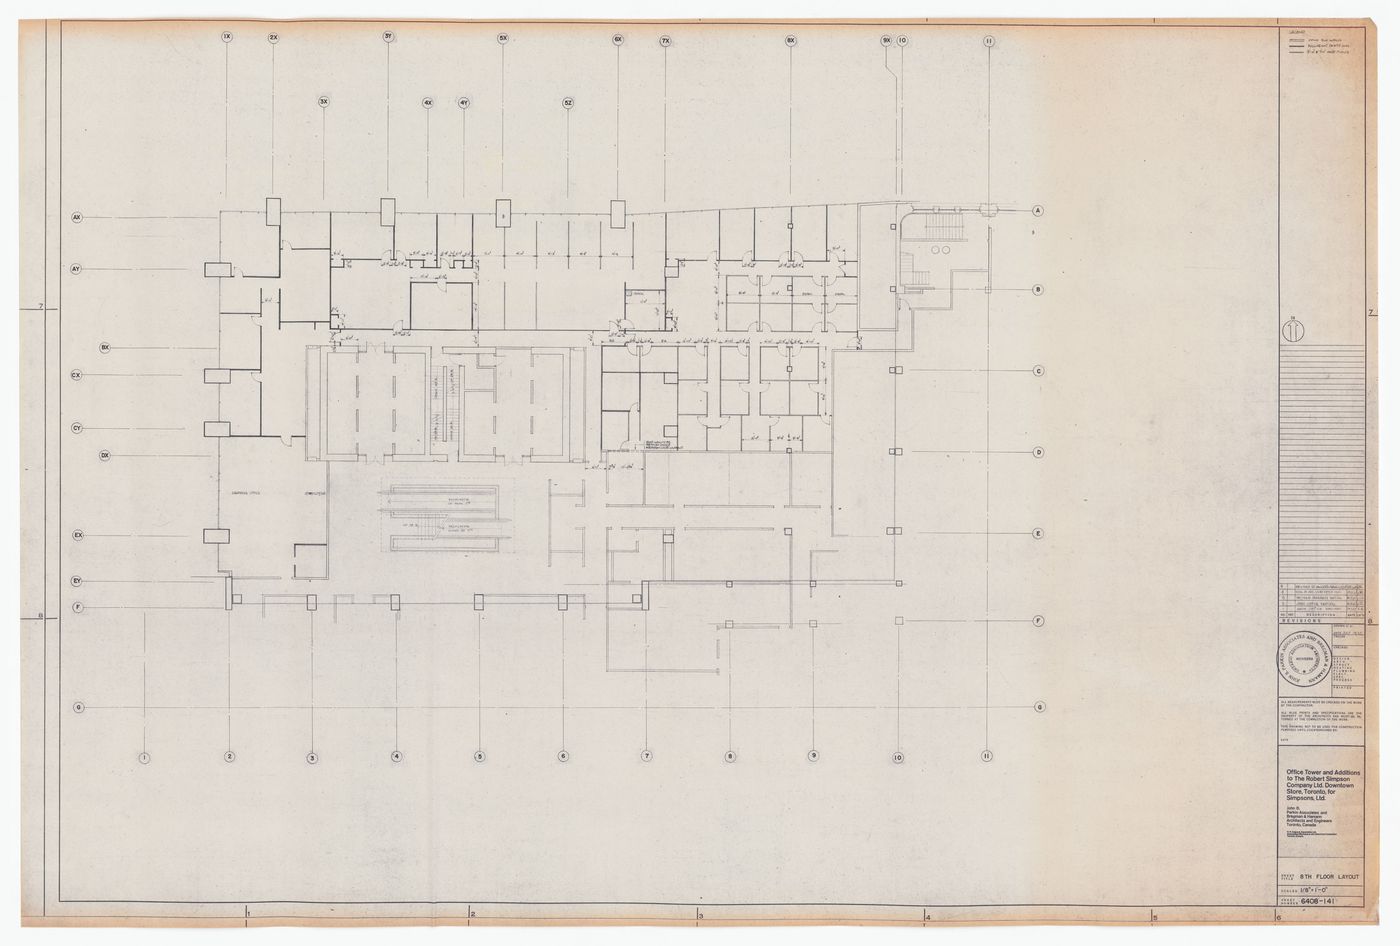 Eighth floor layout plan for construction for The Robert Simpson Company Limited Downtown Store, Office Tower and Additions, Toronto